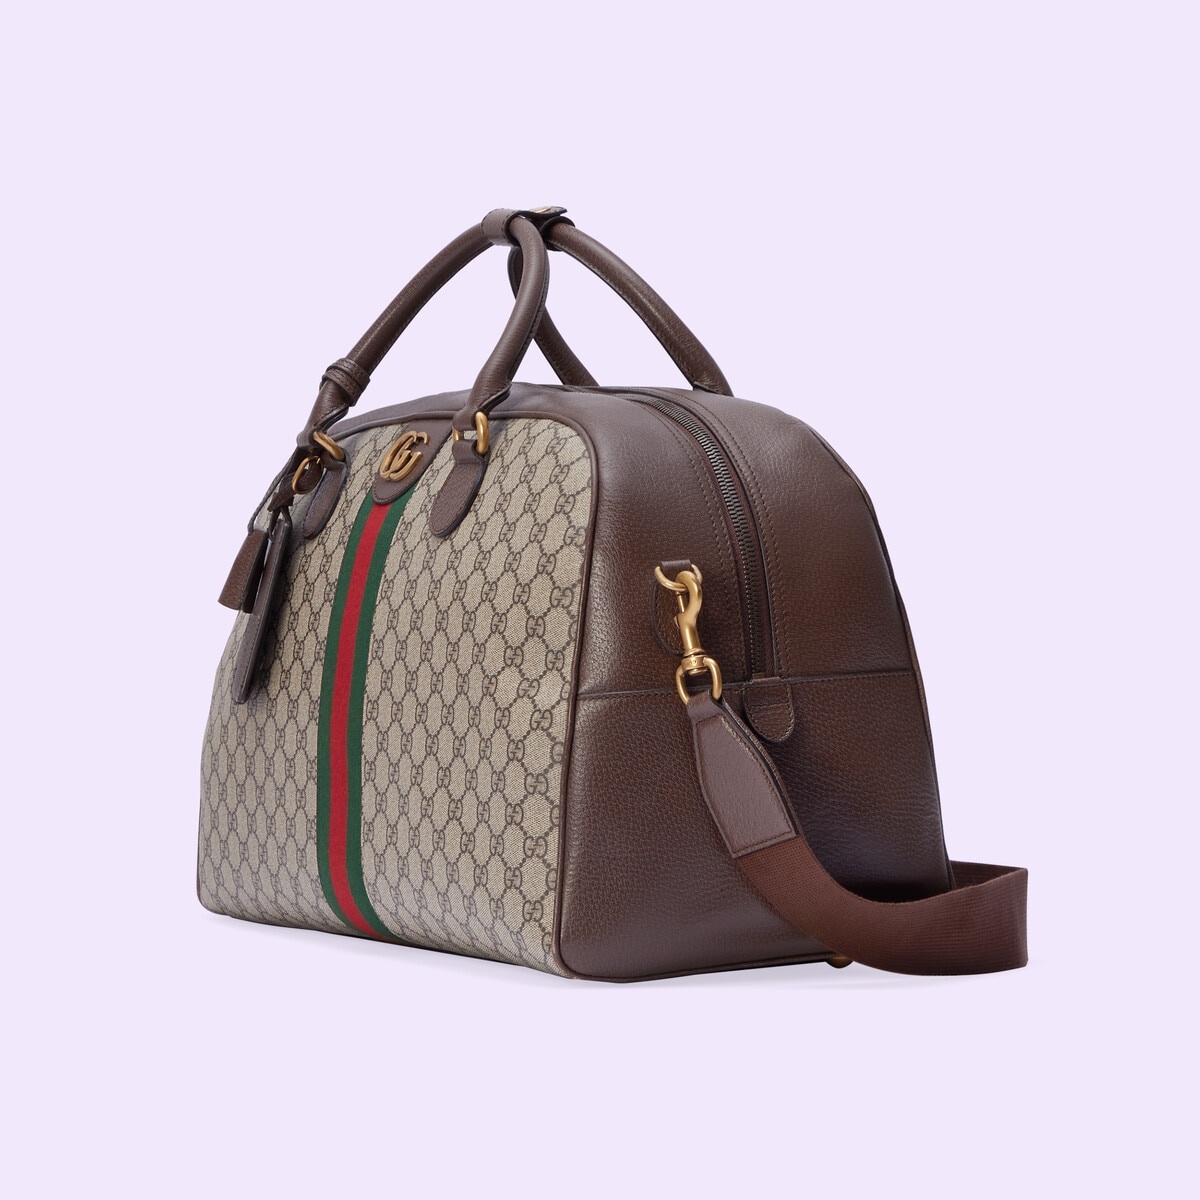 Gucci Large Savoy Duffle Bag In Brown